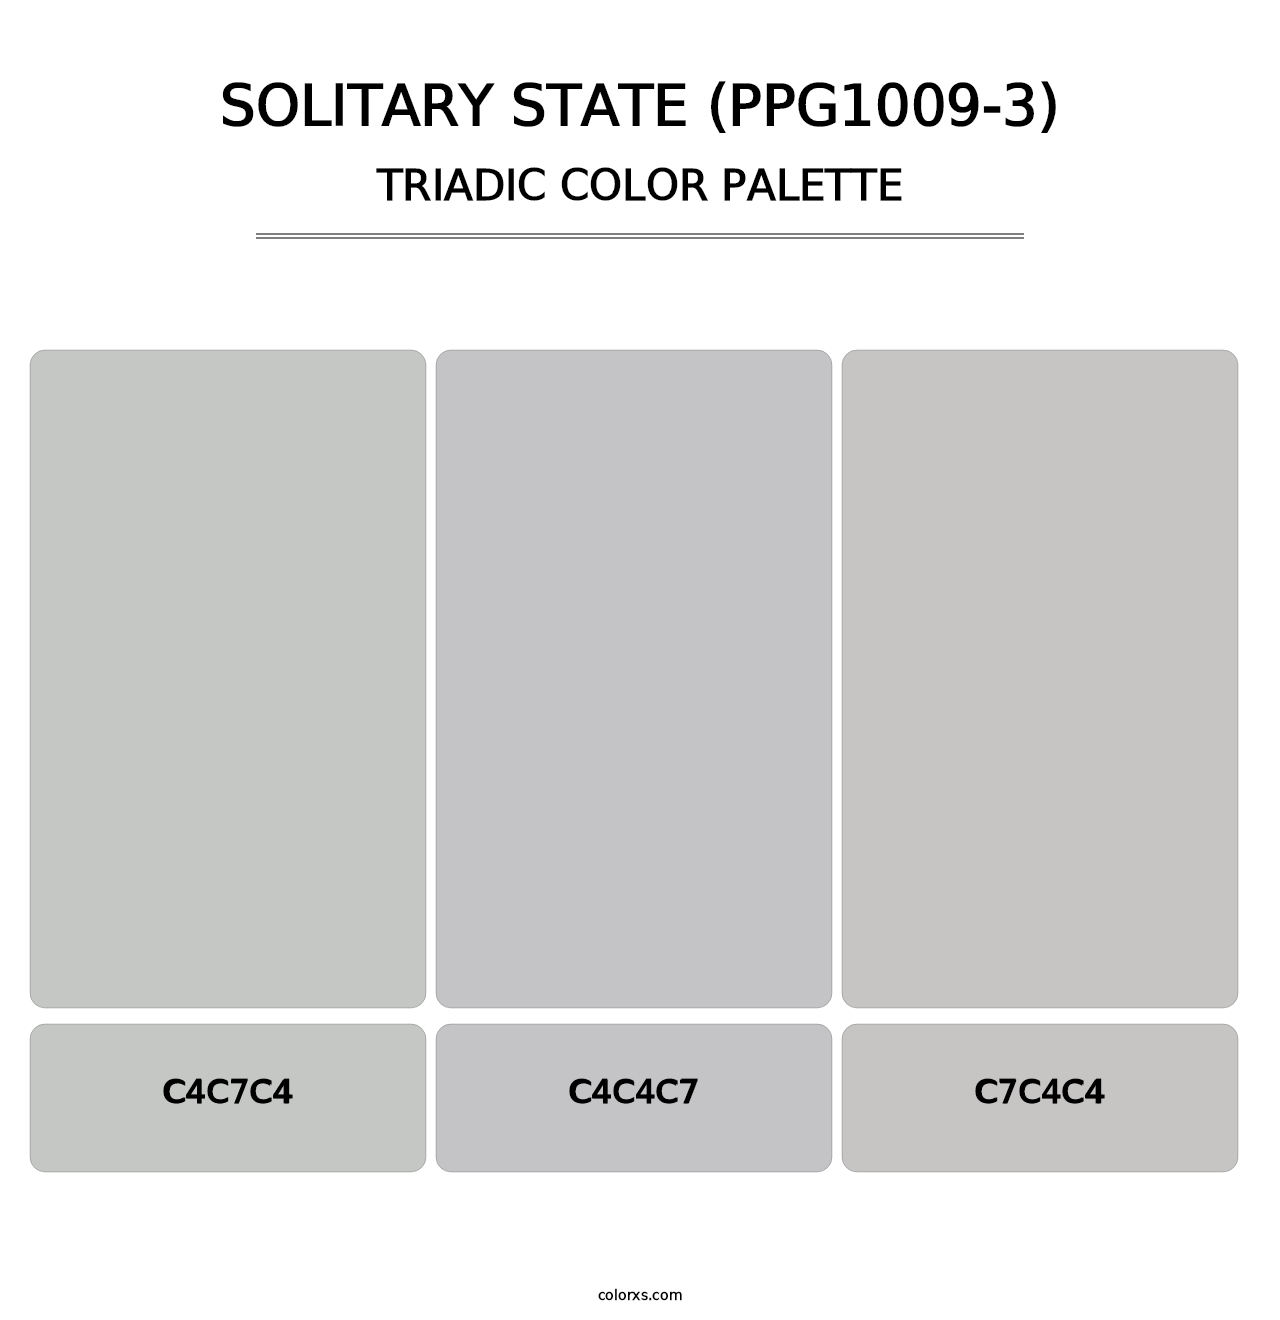 Solitary State (PPG1009-3) - Triadic Color Palette